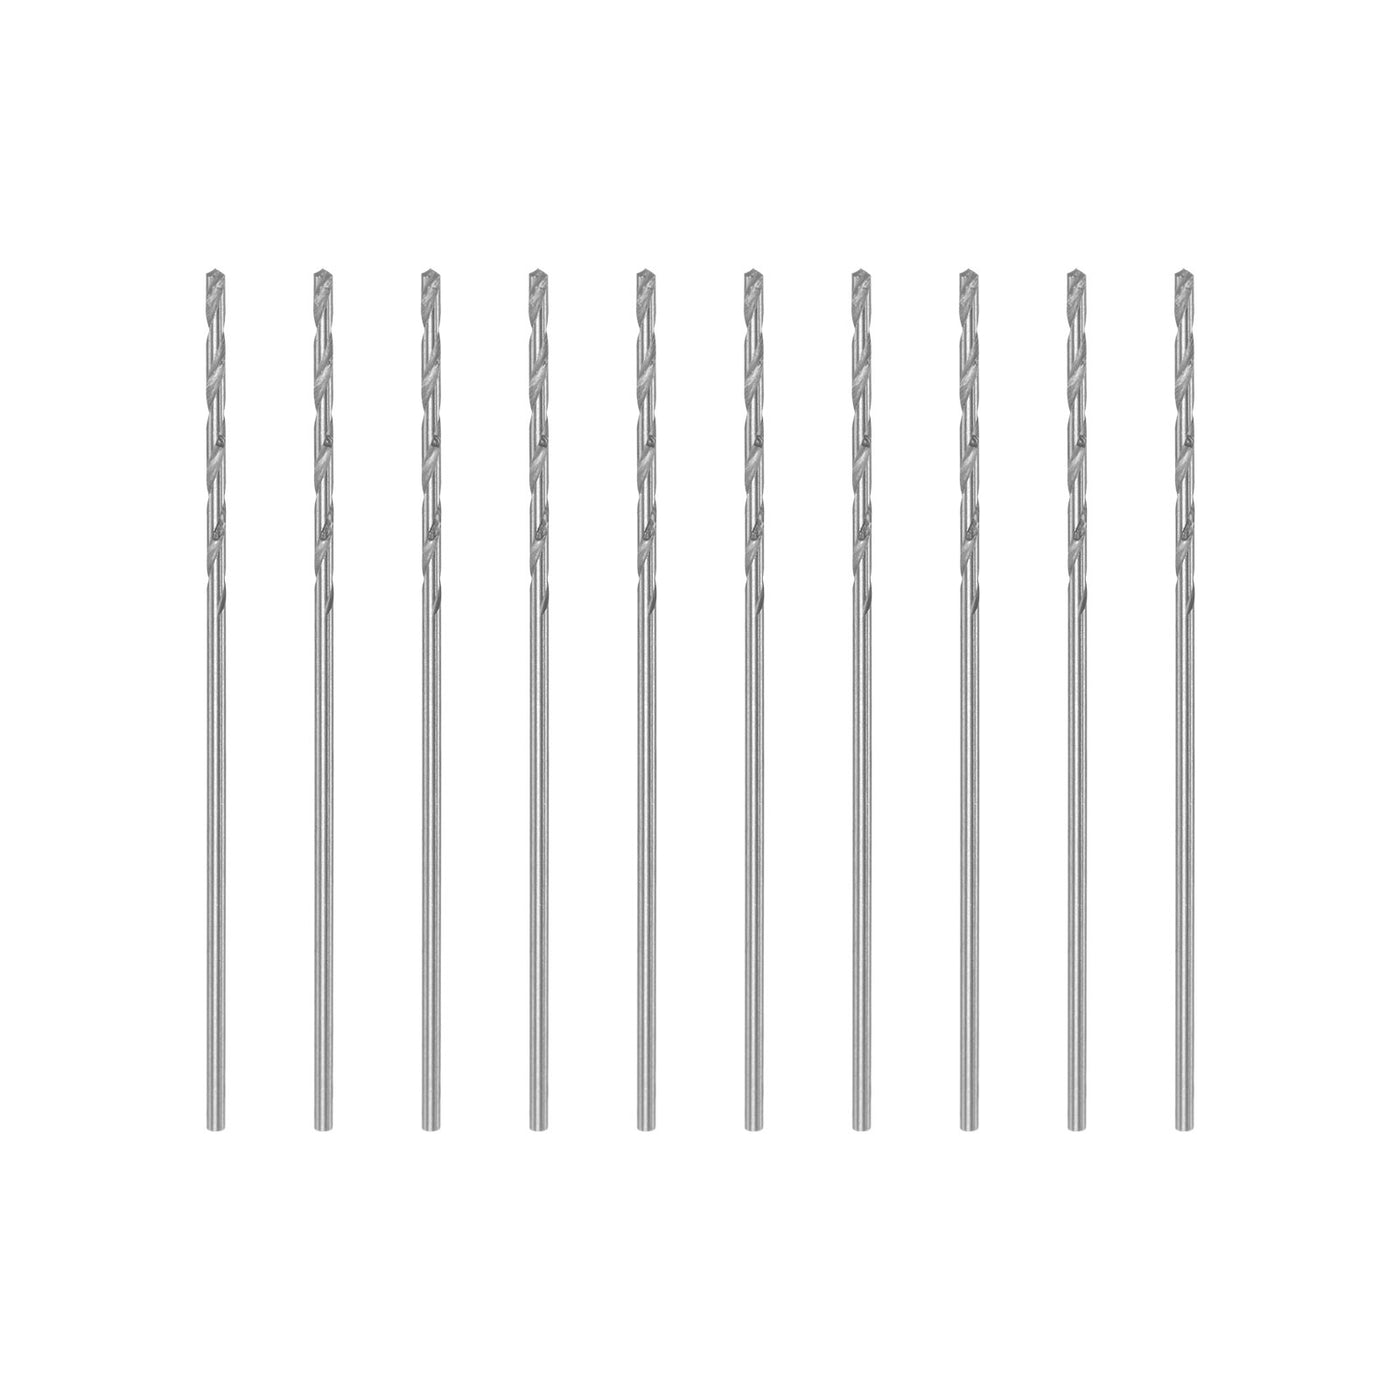 uxcell Uxcell 10 Pcs 0.7mm High Speed Steel Drill Bits, Fully Ground 32mm Length Drill Bit